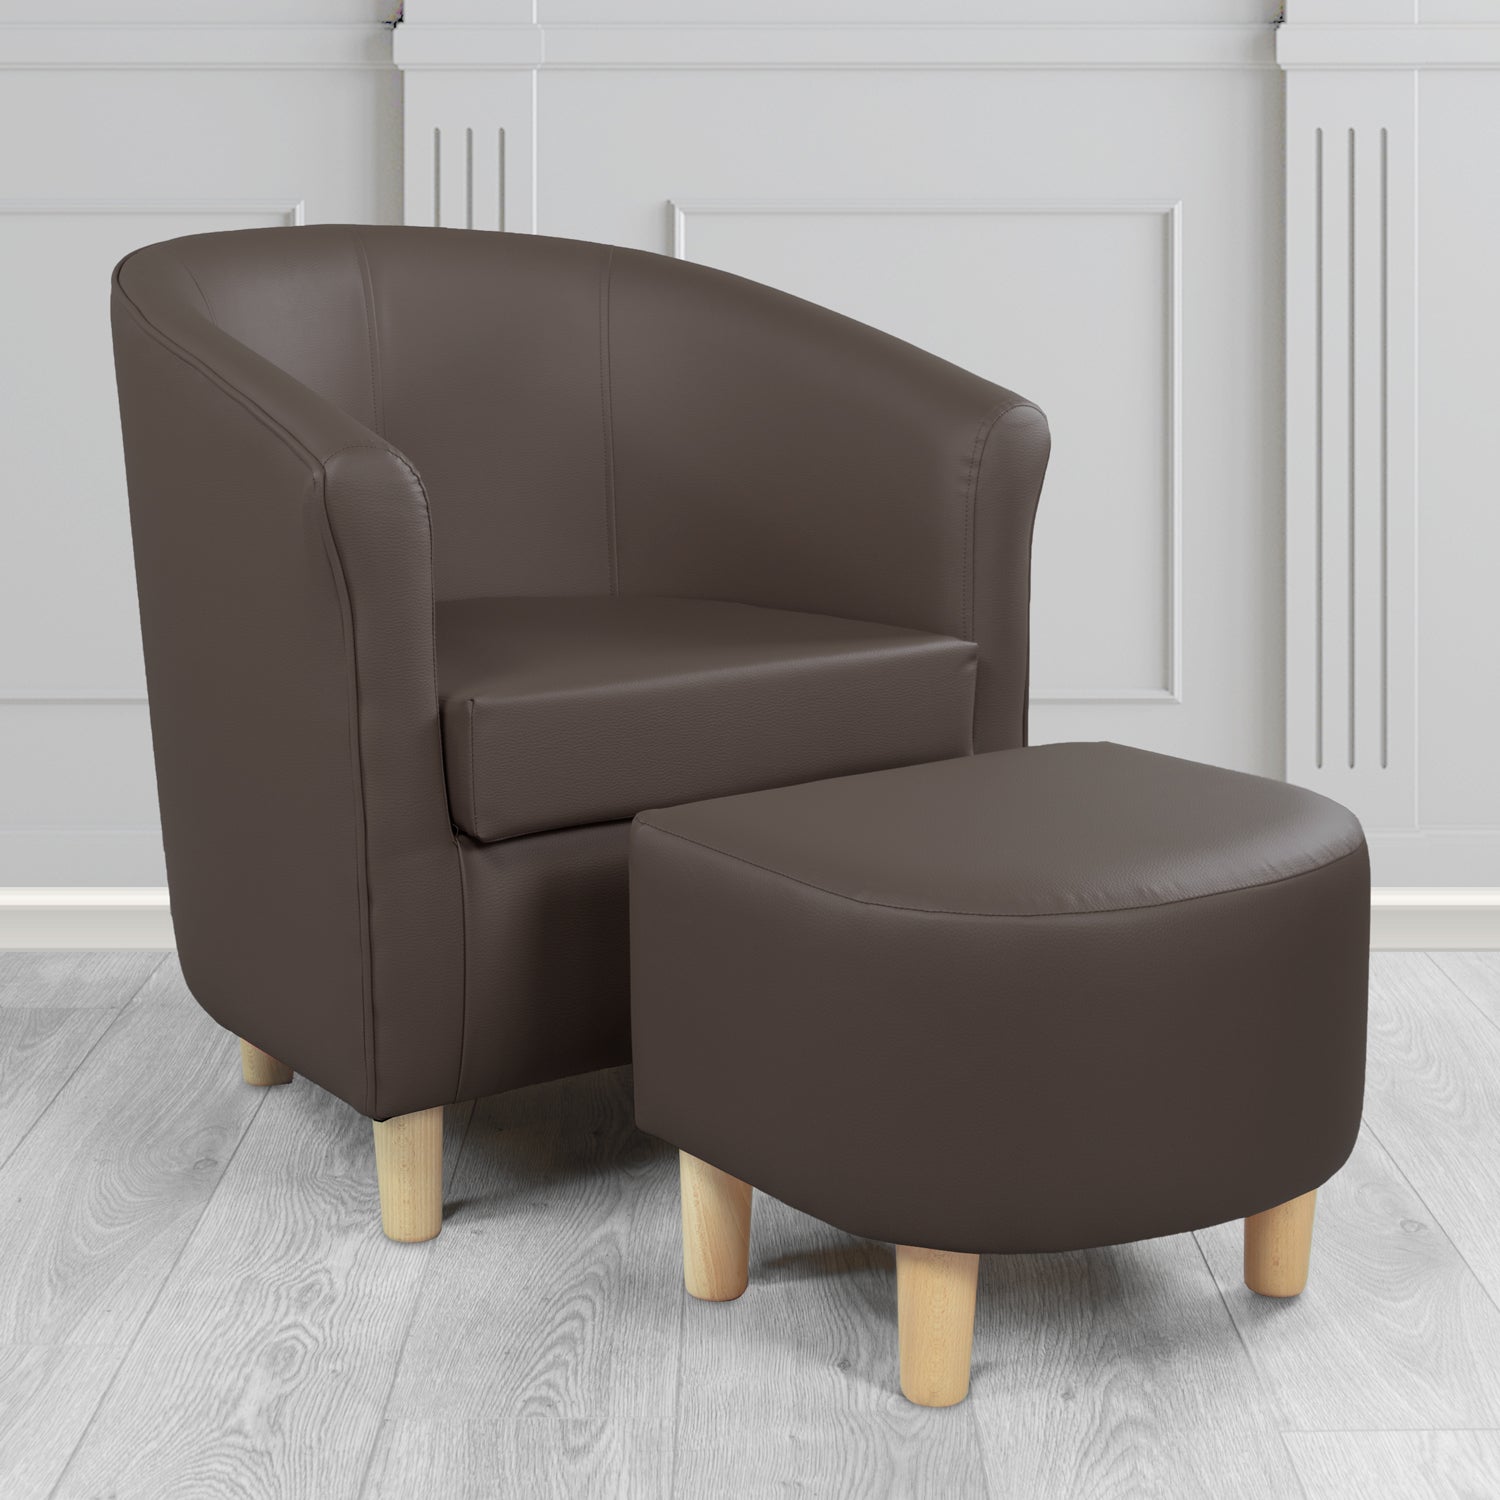 Tuscany Tub Chair with Footstool Set in Madrid Chocolate Faux Leather